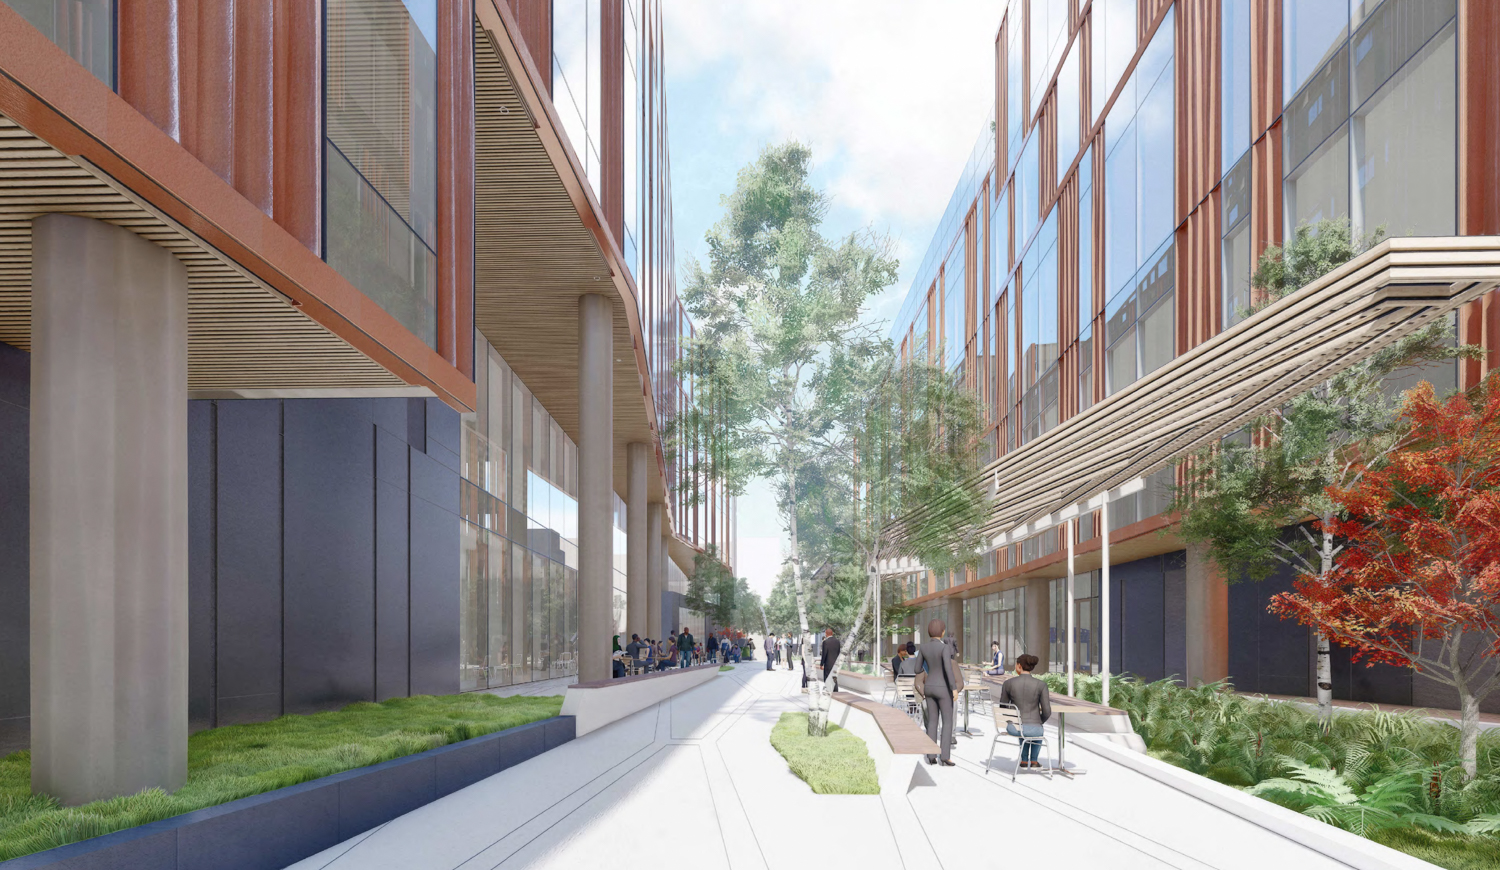 ACLS Millbrae Campus paseo cutting between buildings one and three looking north, rendering by WRNS Studio